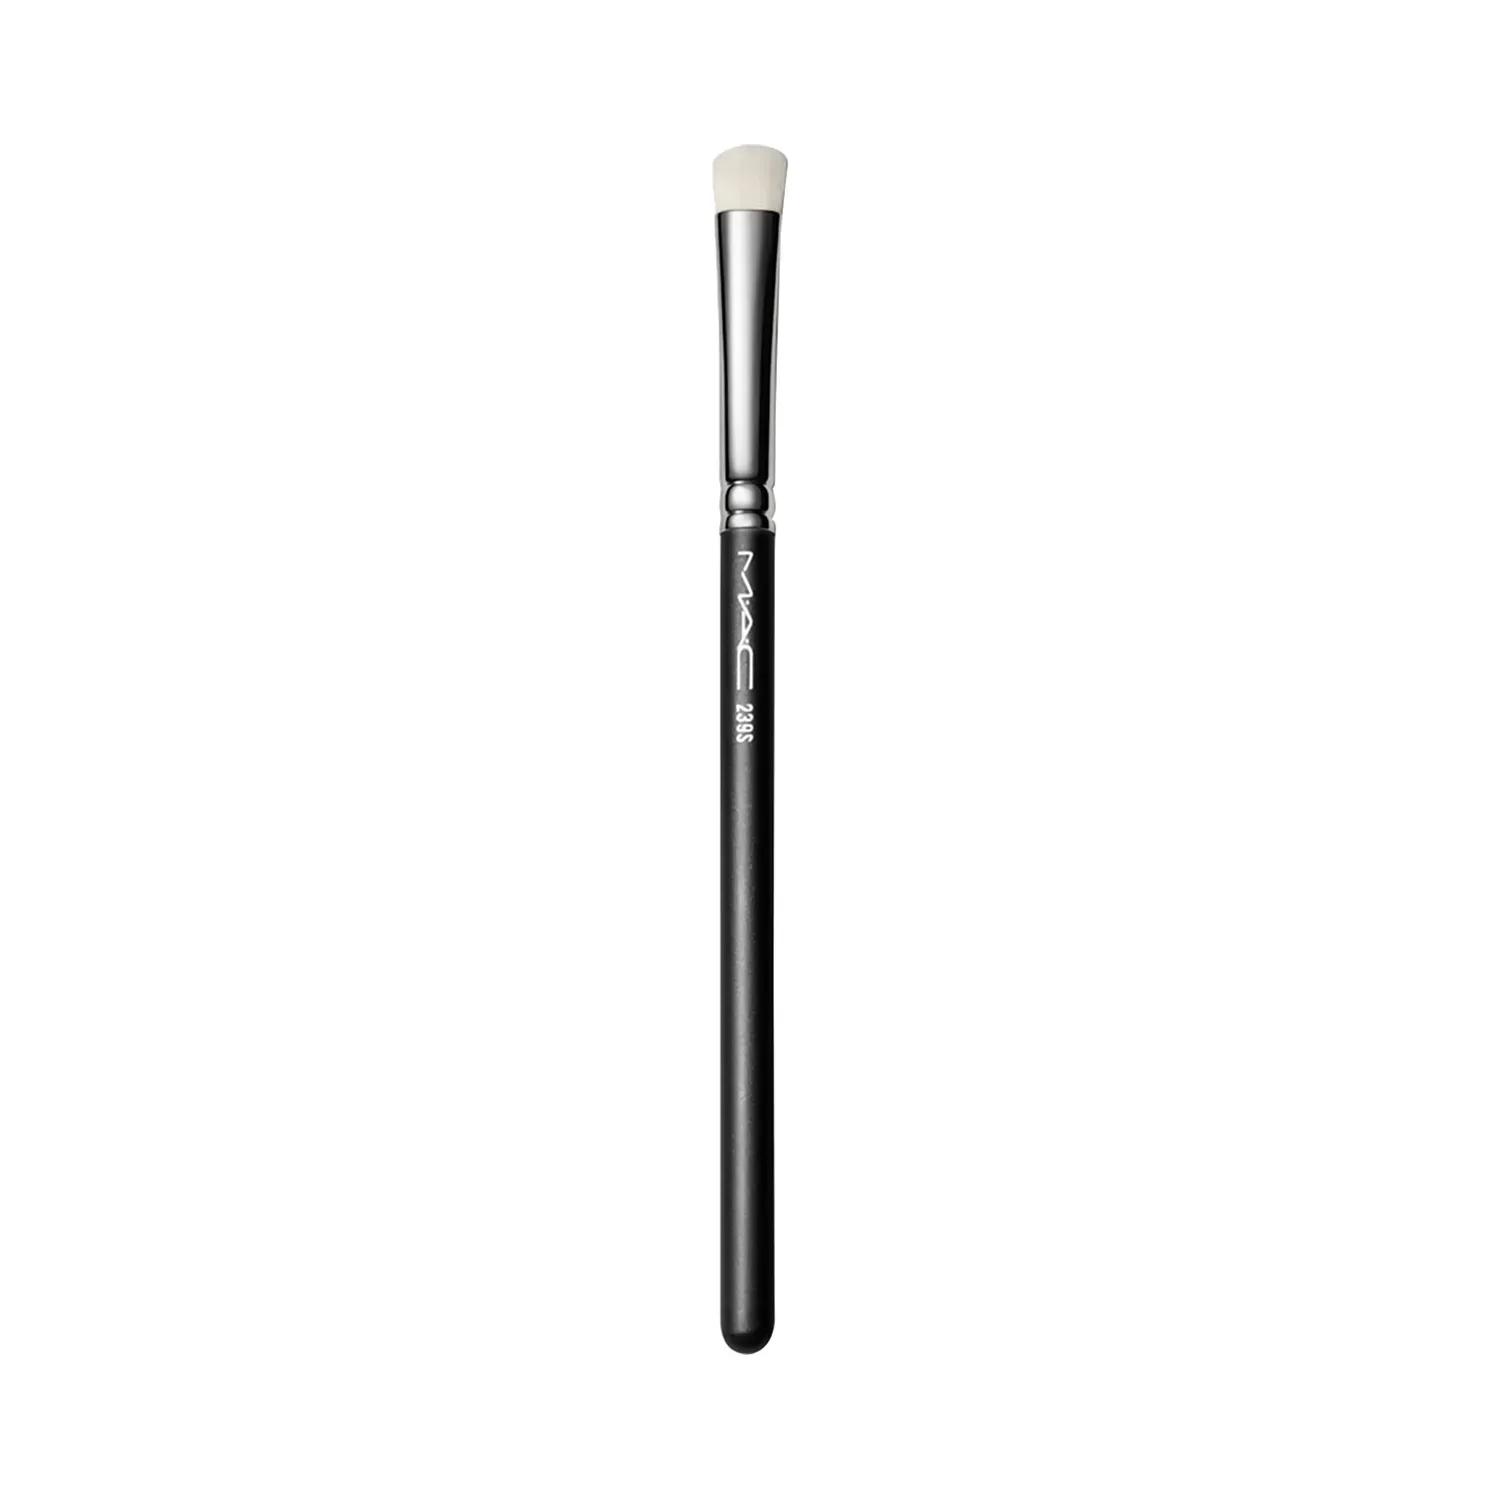 M.A.C | M.A.C Synthetic Eye Shader Brush - 239S (1.8g)